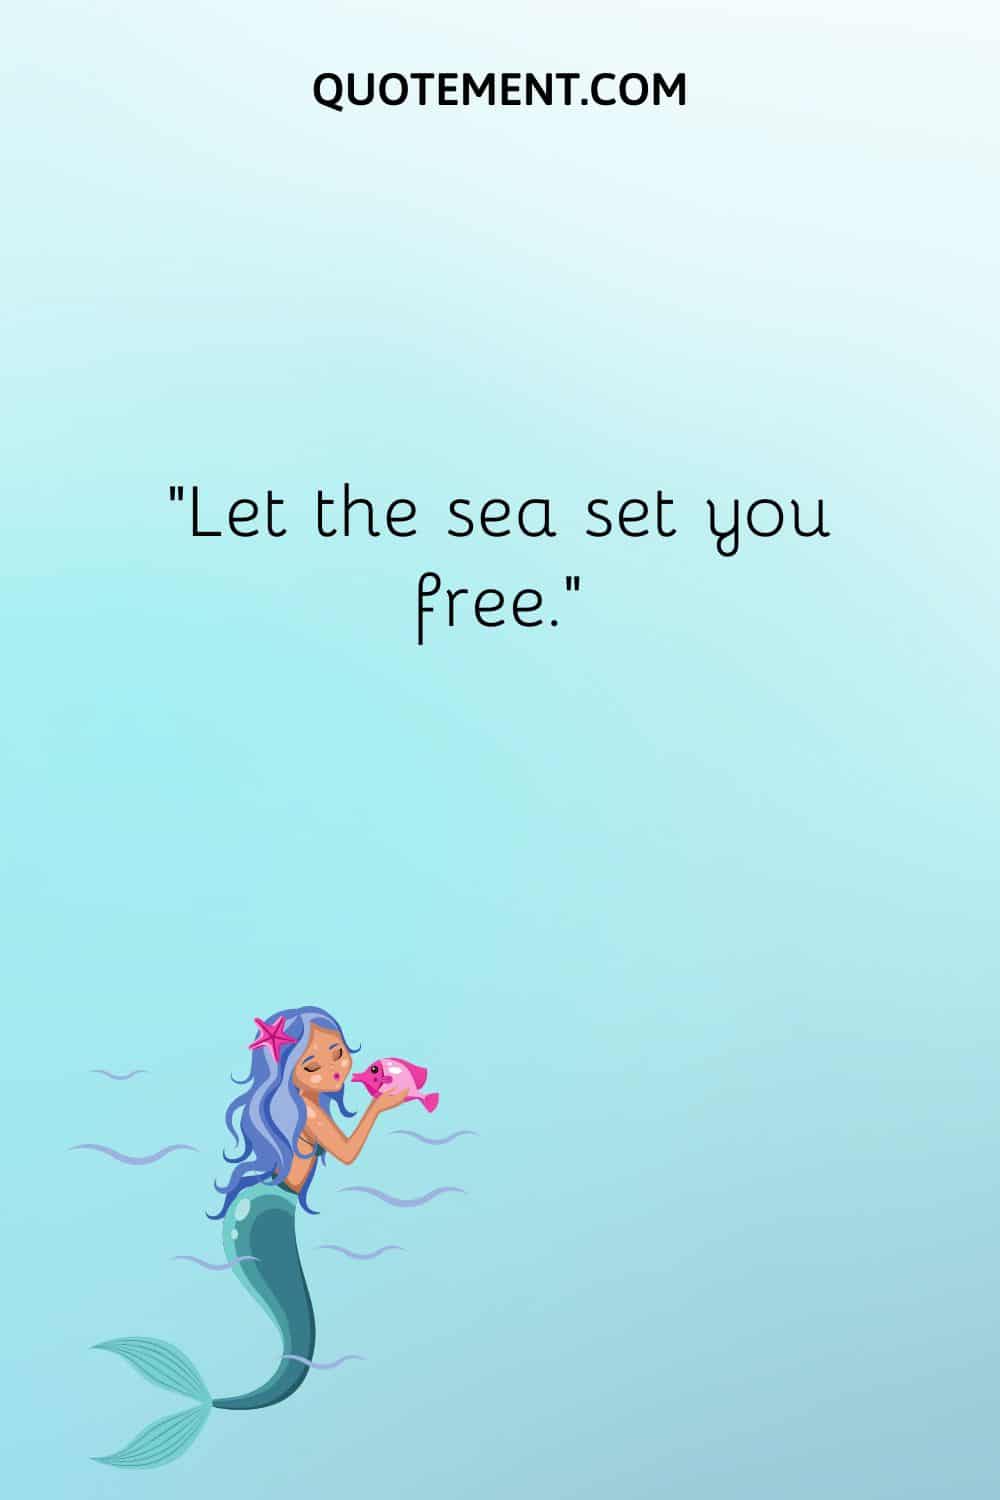 “Let the sea set you free.”